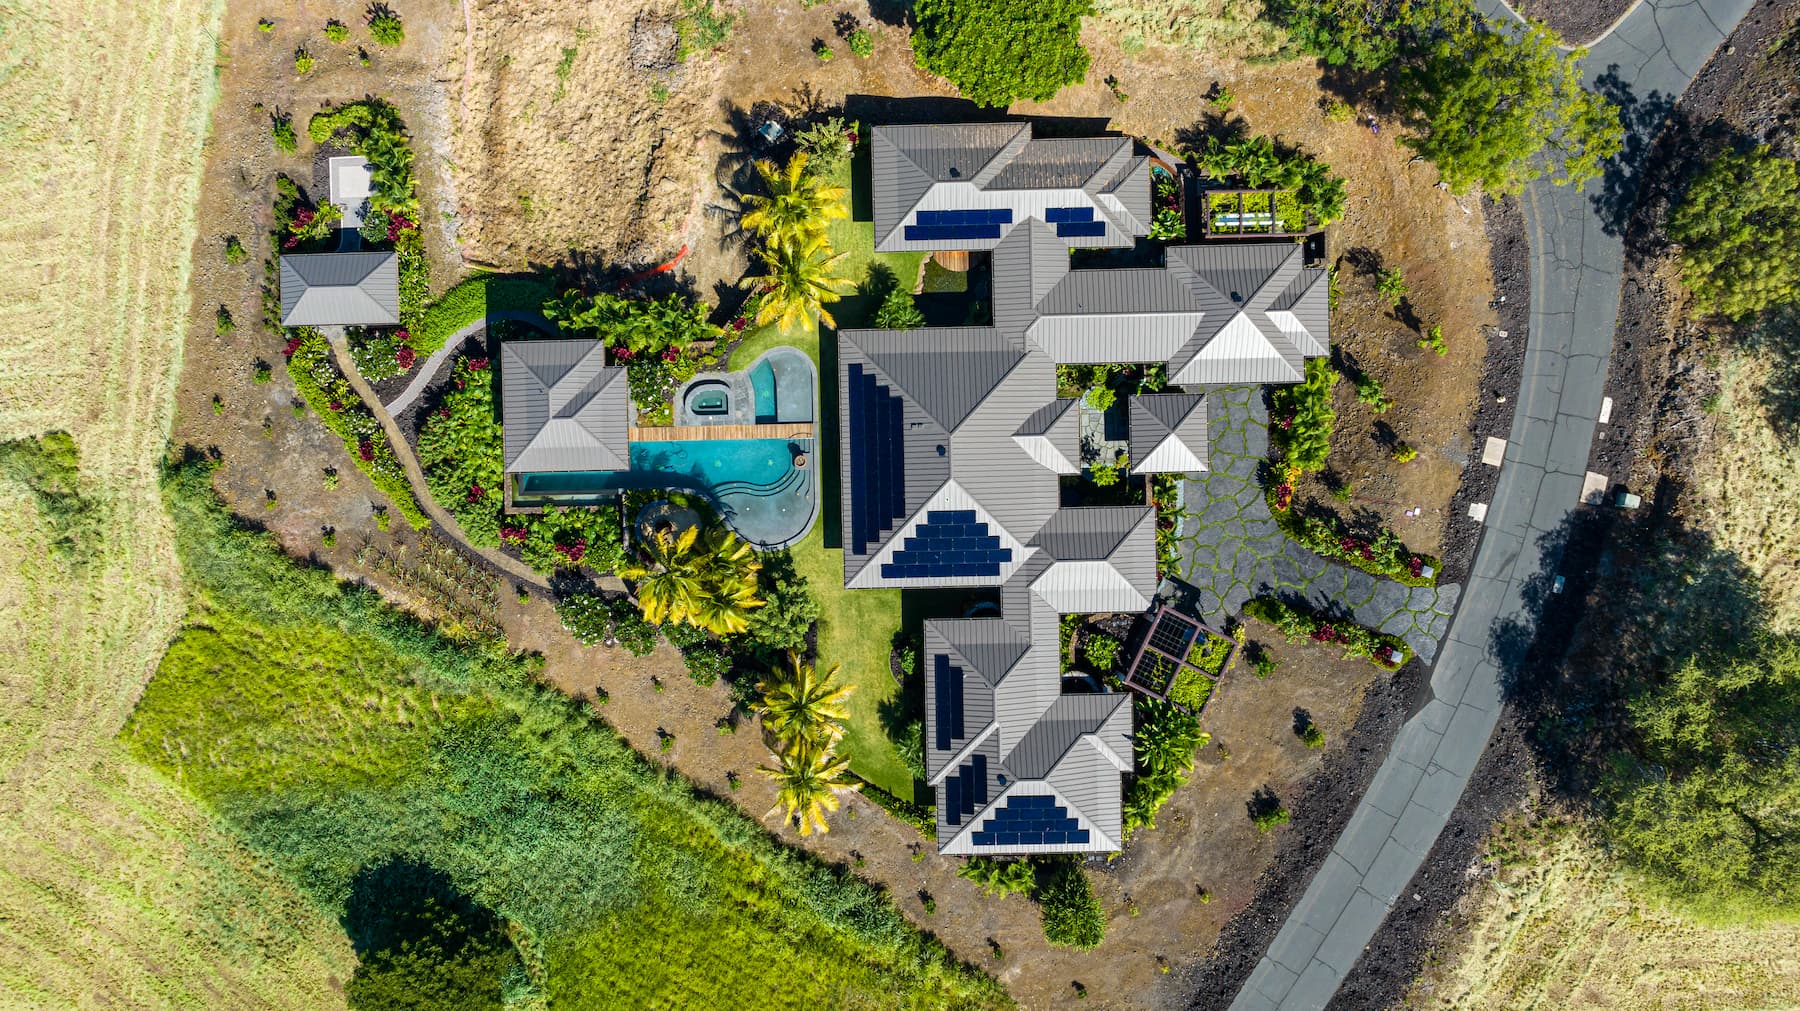 An aerial view of a home with rooftop solar panels.